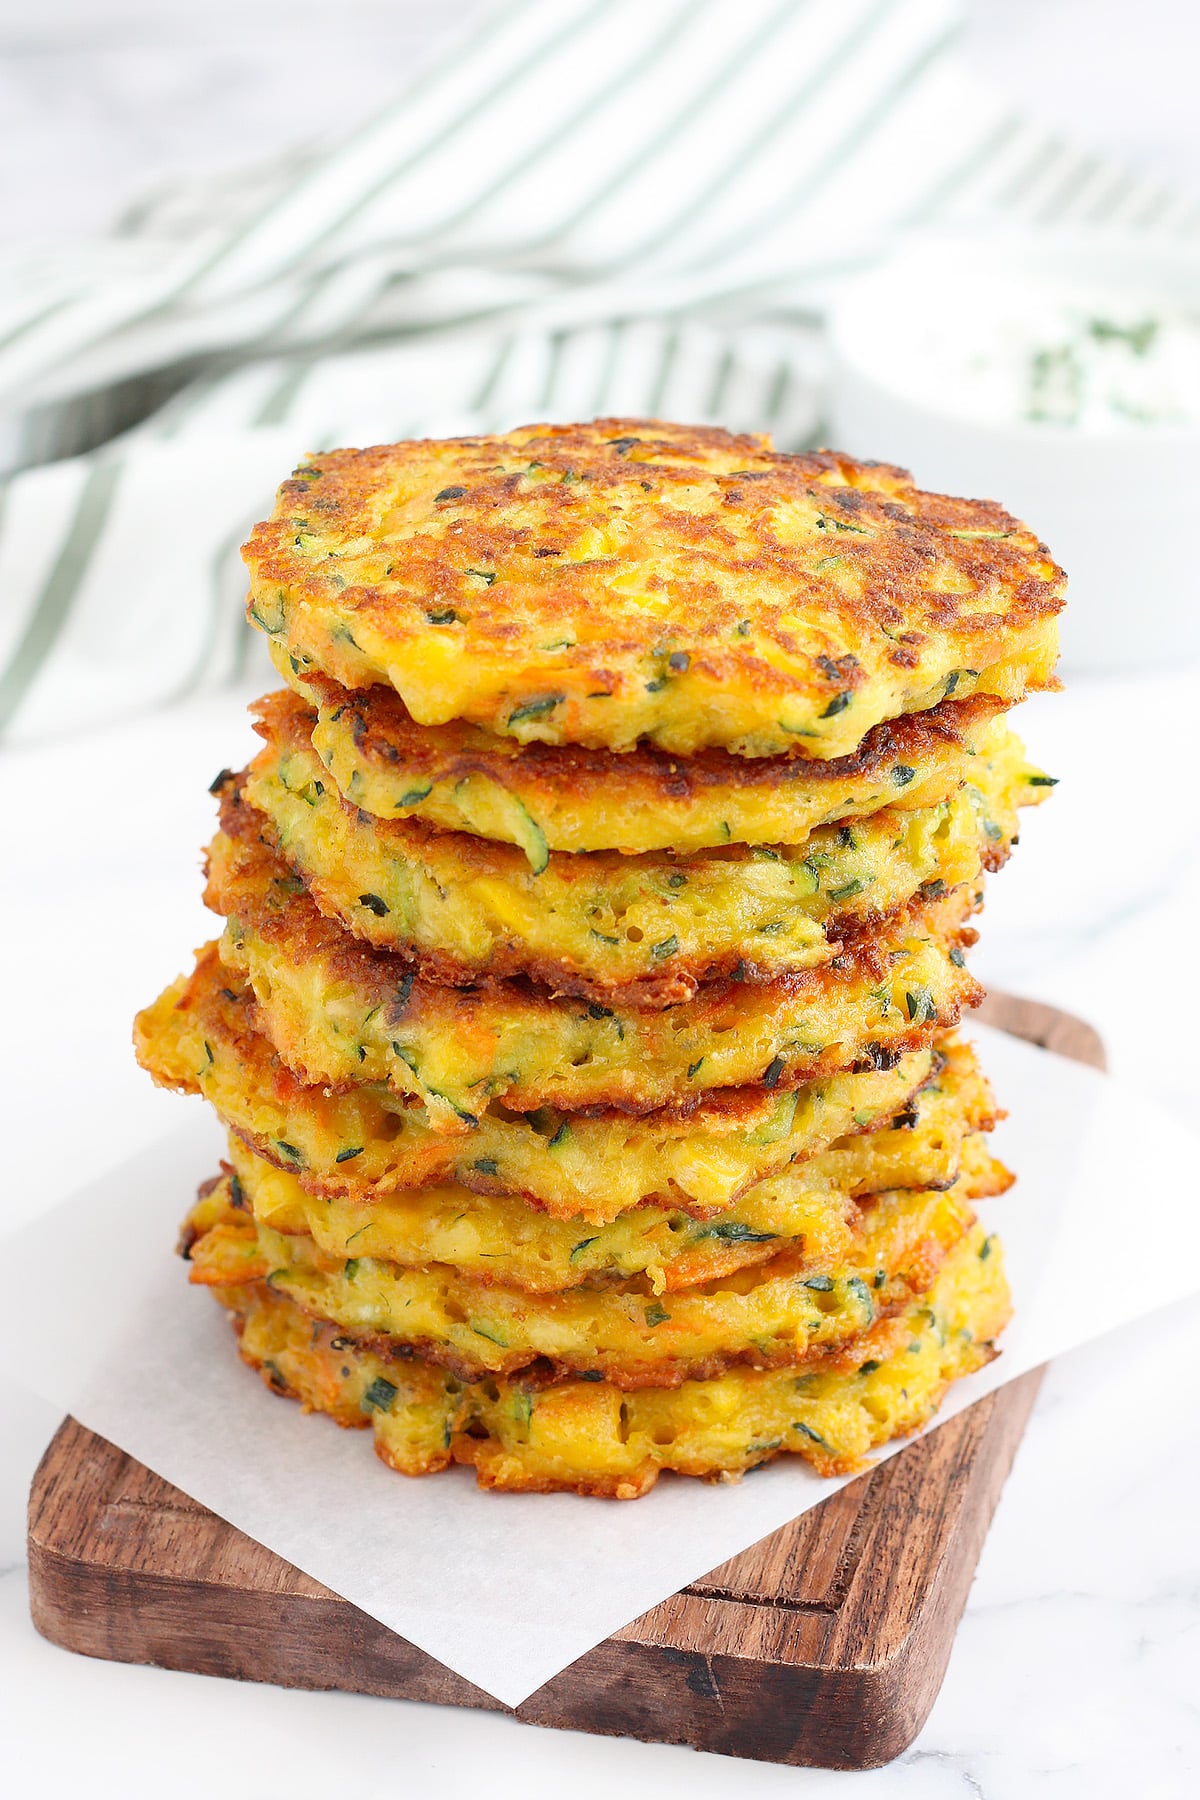 A stack of zucchini fritters on a wooden serving platter with a striped linen in the background.